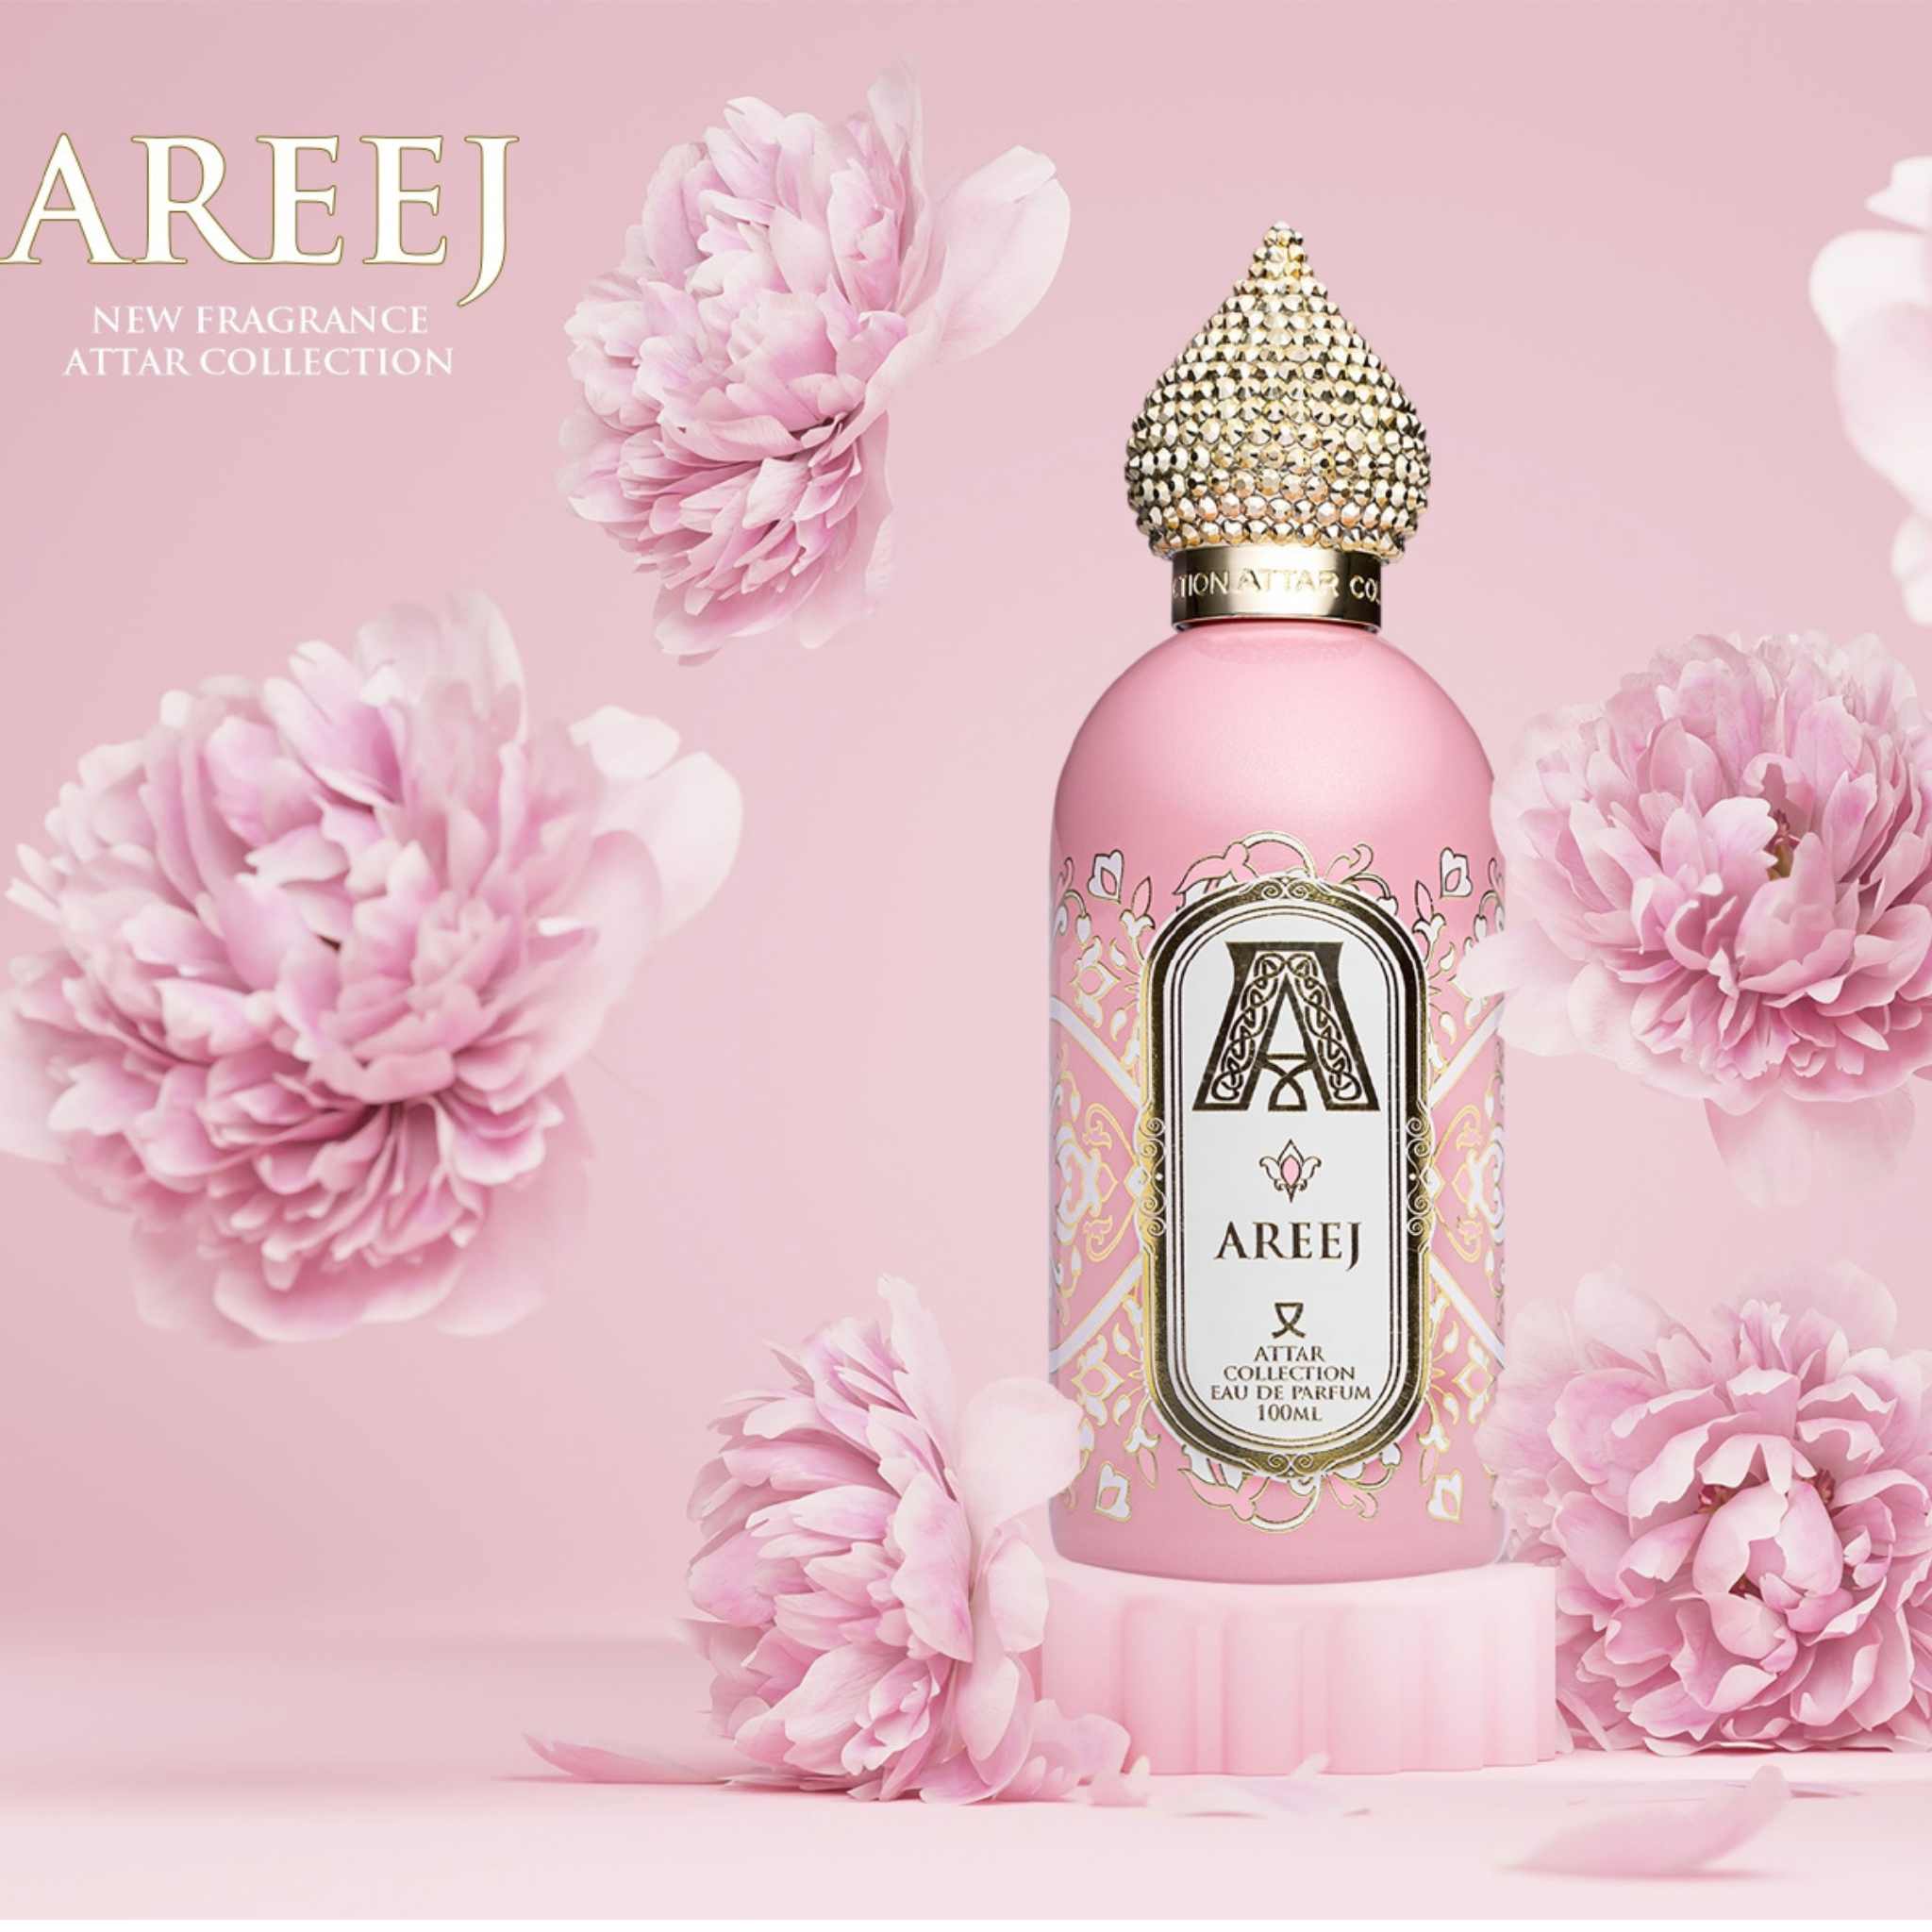 welcome-the-latest-release-from-attar-collection-areej